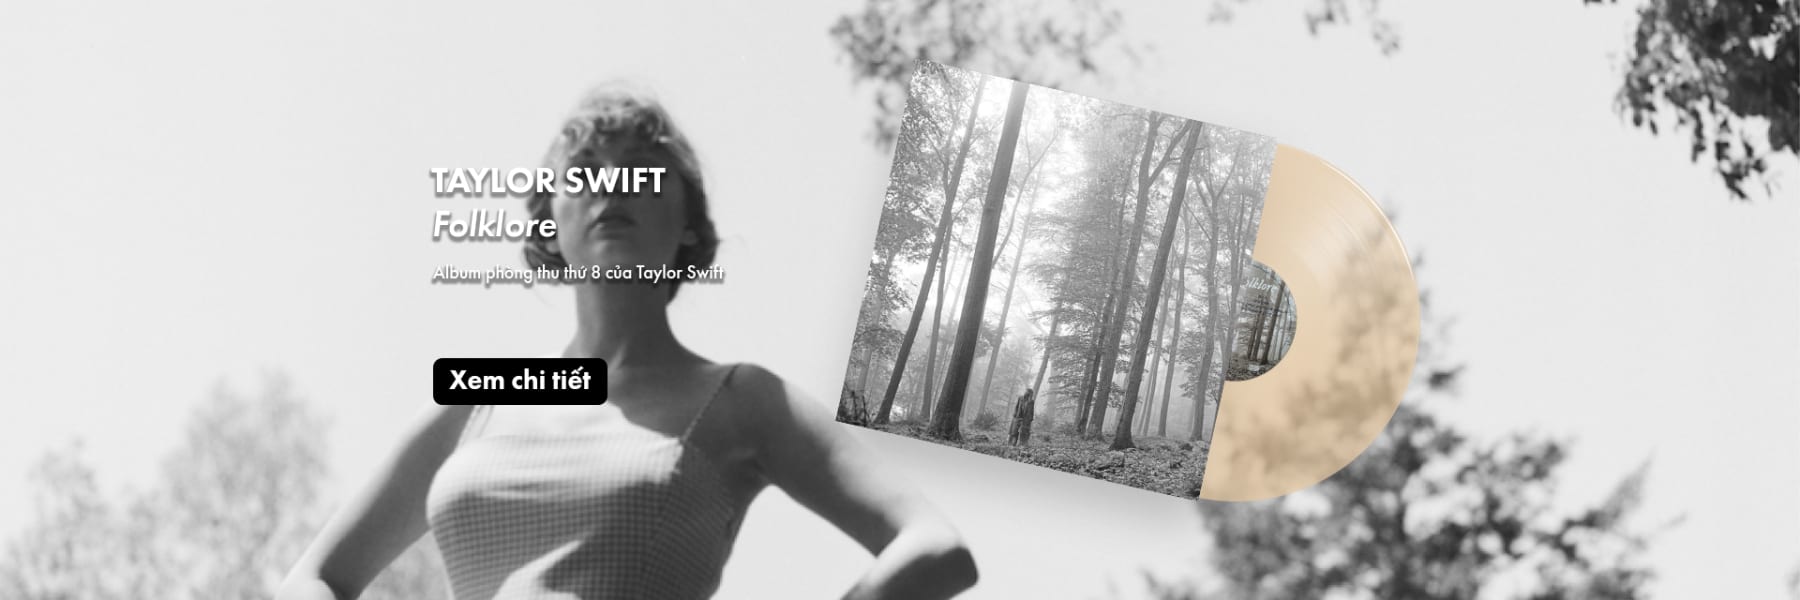 https://vocrecords.vn/product/dia-moi/recommendation/recommendation-1/taylor-swift-folklore-be/